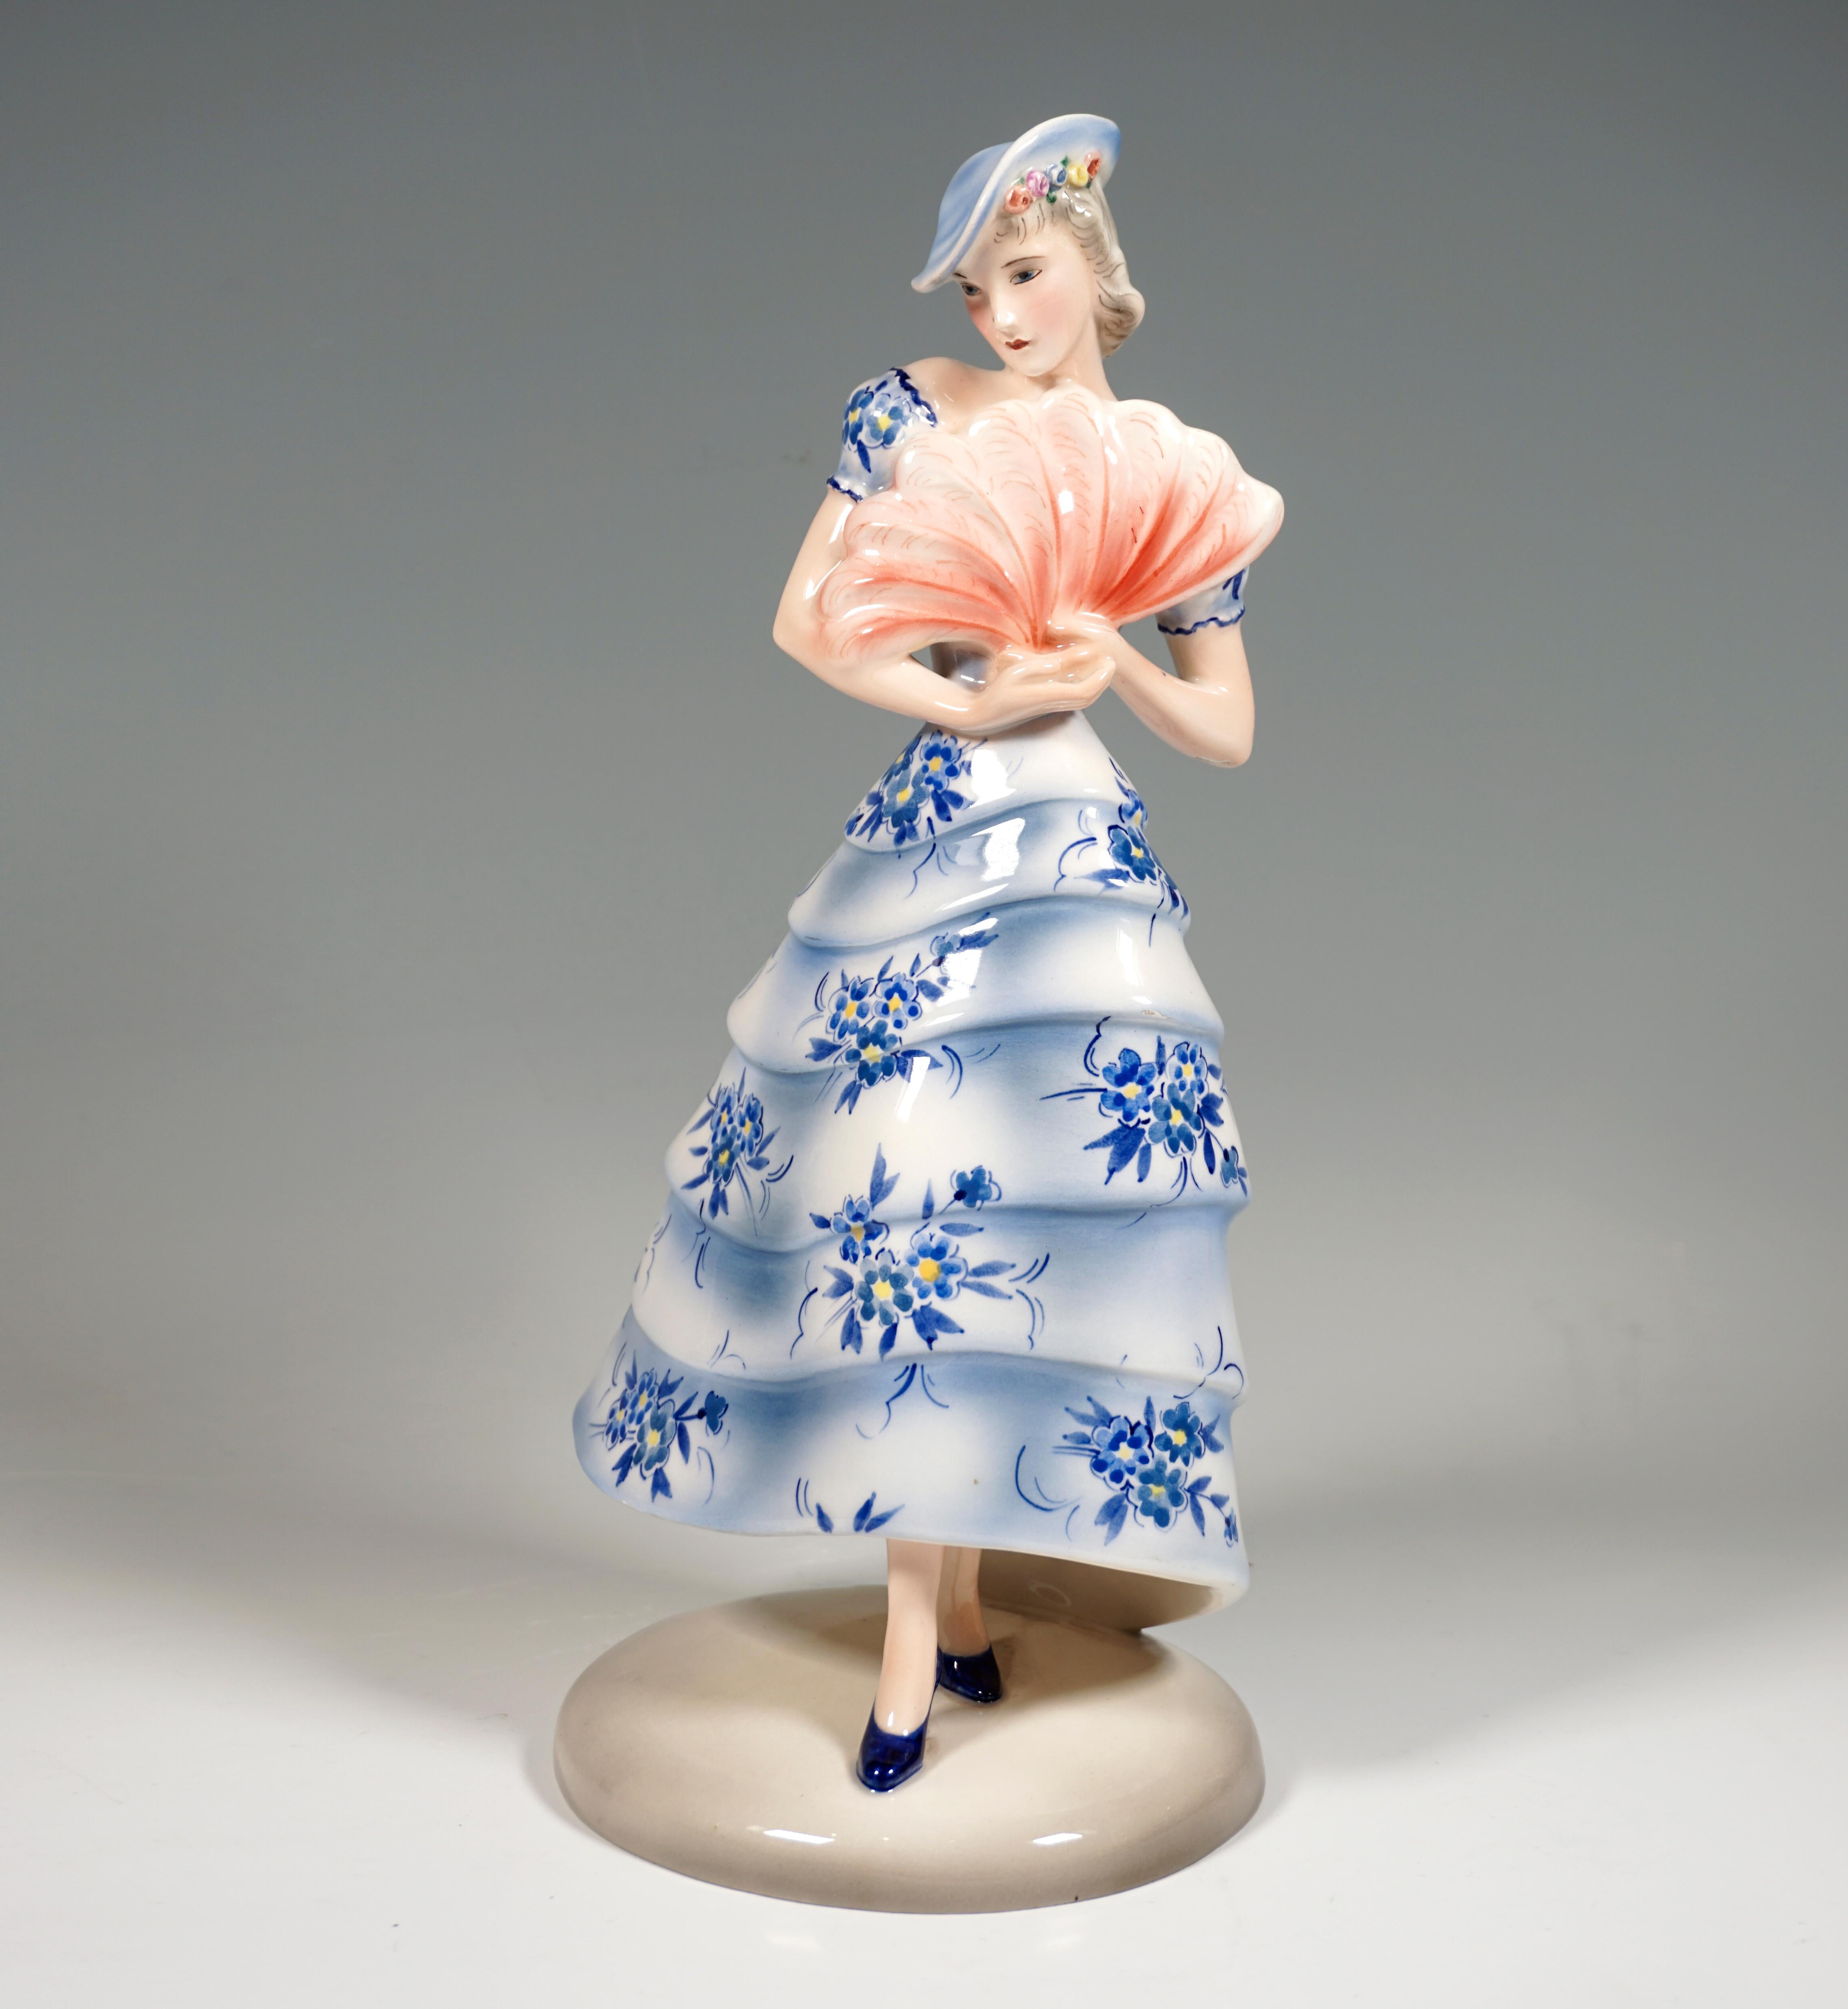 Very Rare Goldscheider Vienna Figurine of the late 1930s:
Representation of an elegant dancer in a long, flowered summer dress with a flounced skirt with floral decorations and matching hat, her head tilted slightly to the right in a pose, holding